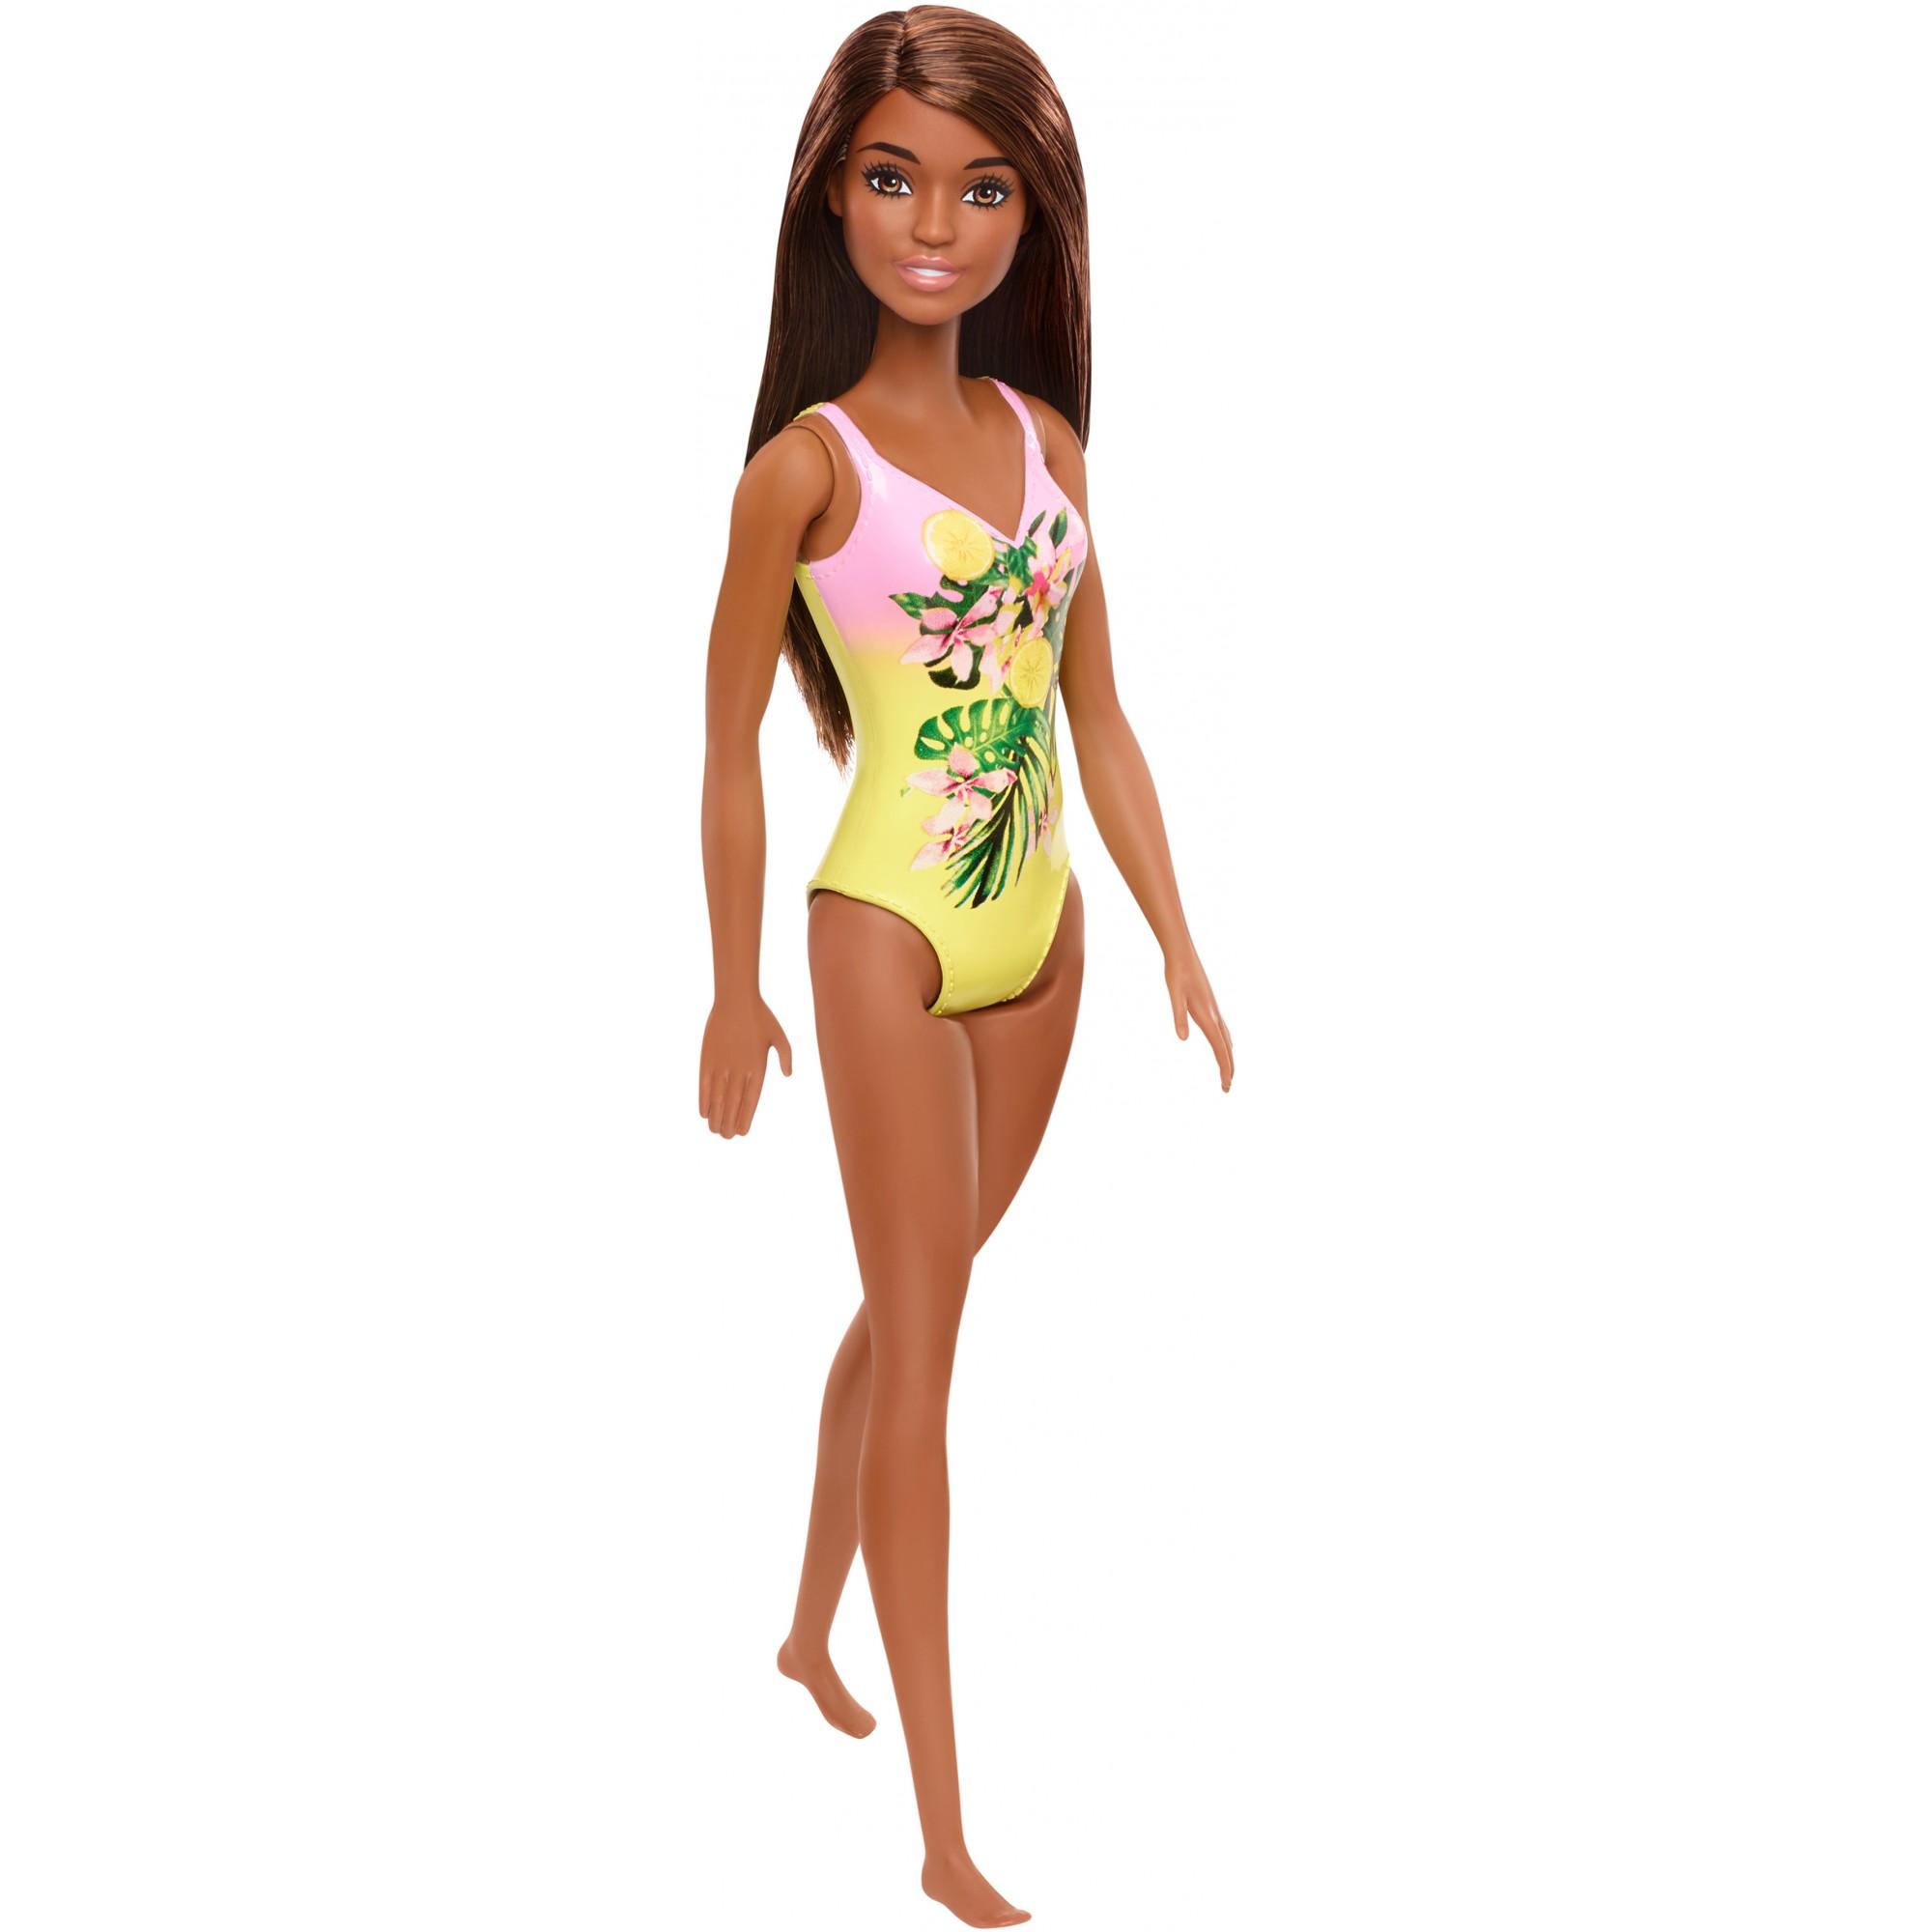 Barbie Swimsuit Beach Doll with Brown Hair & Tropical Floral Print Suit - image 1 of 6